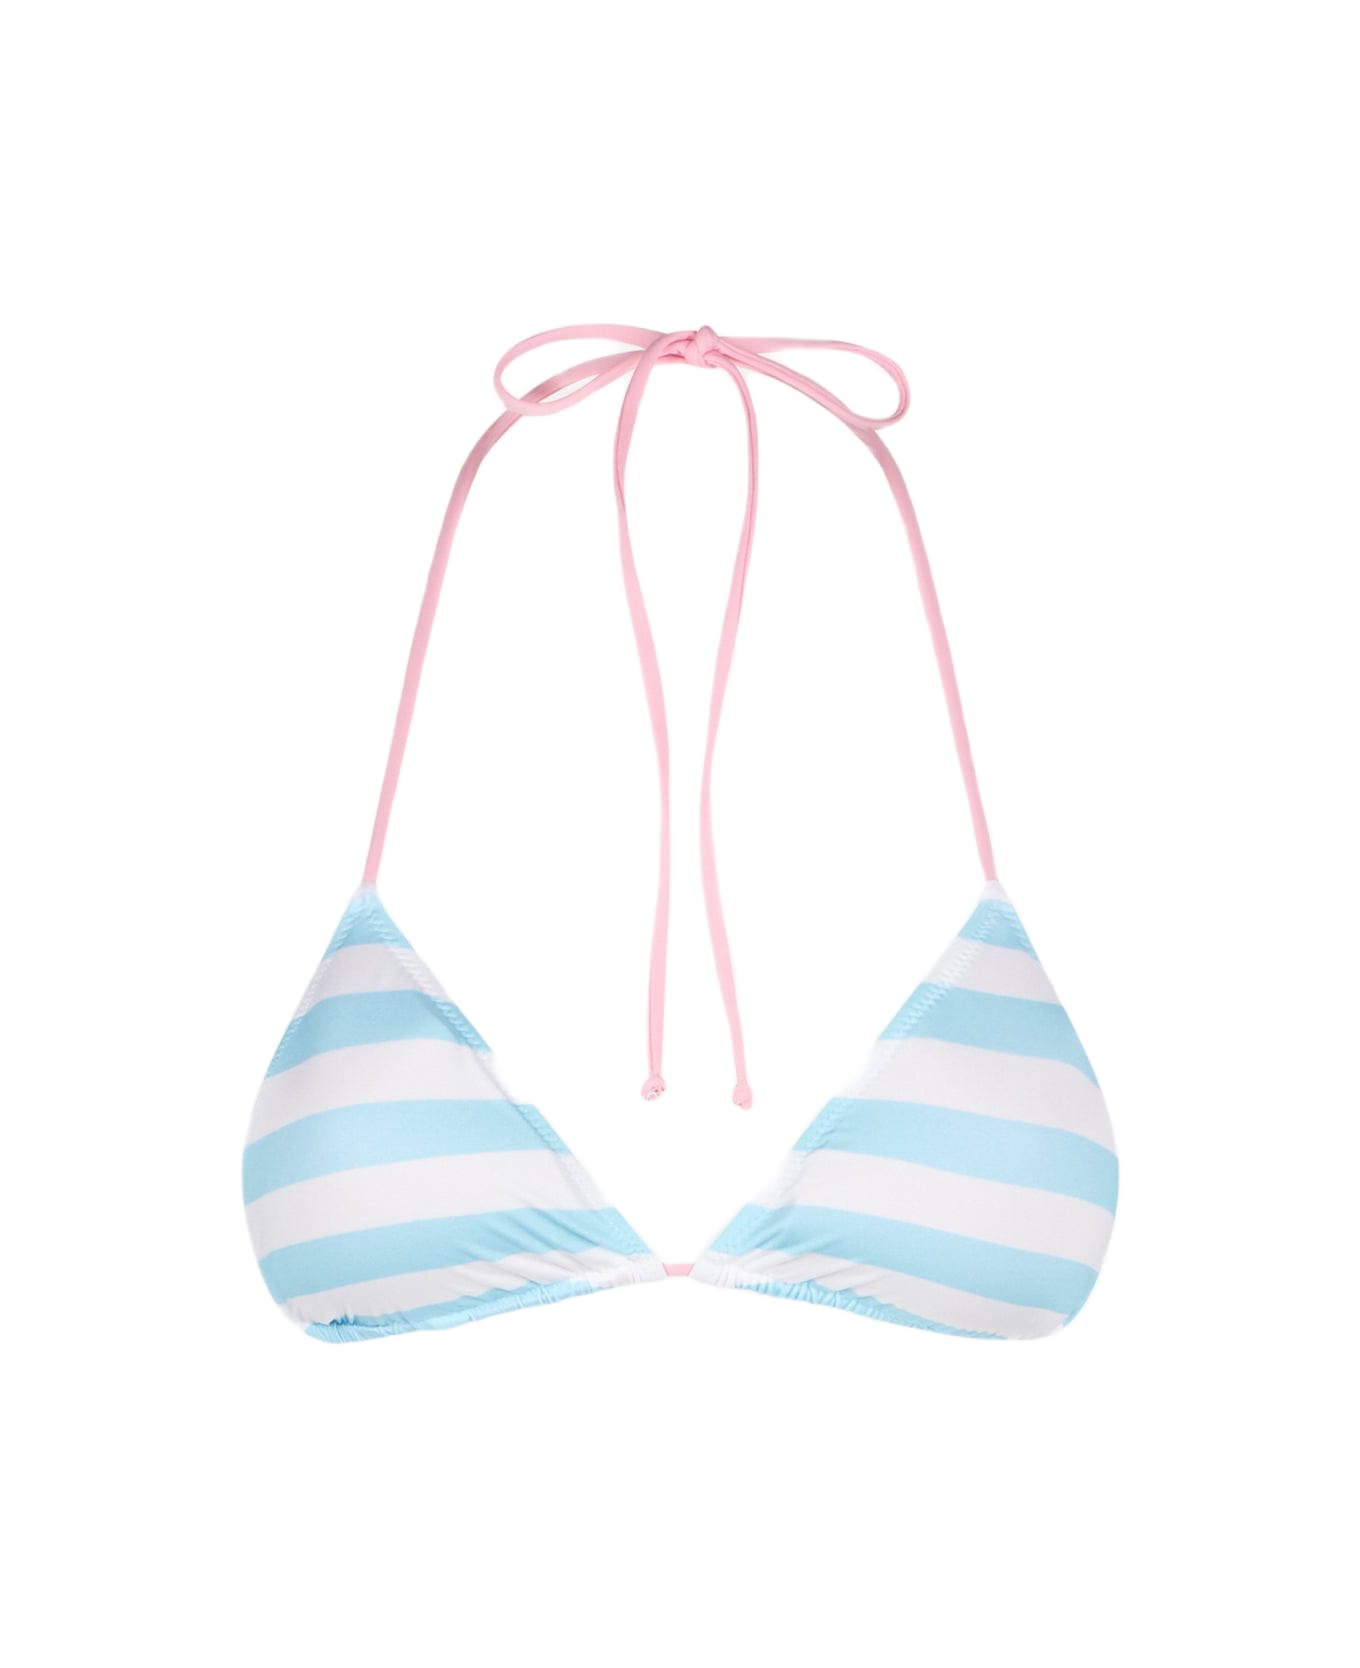 MC2 Saint Barth Woman Triangle Top Swimsuit With Striped Print | Fiorucci Special Edition - BLUE